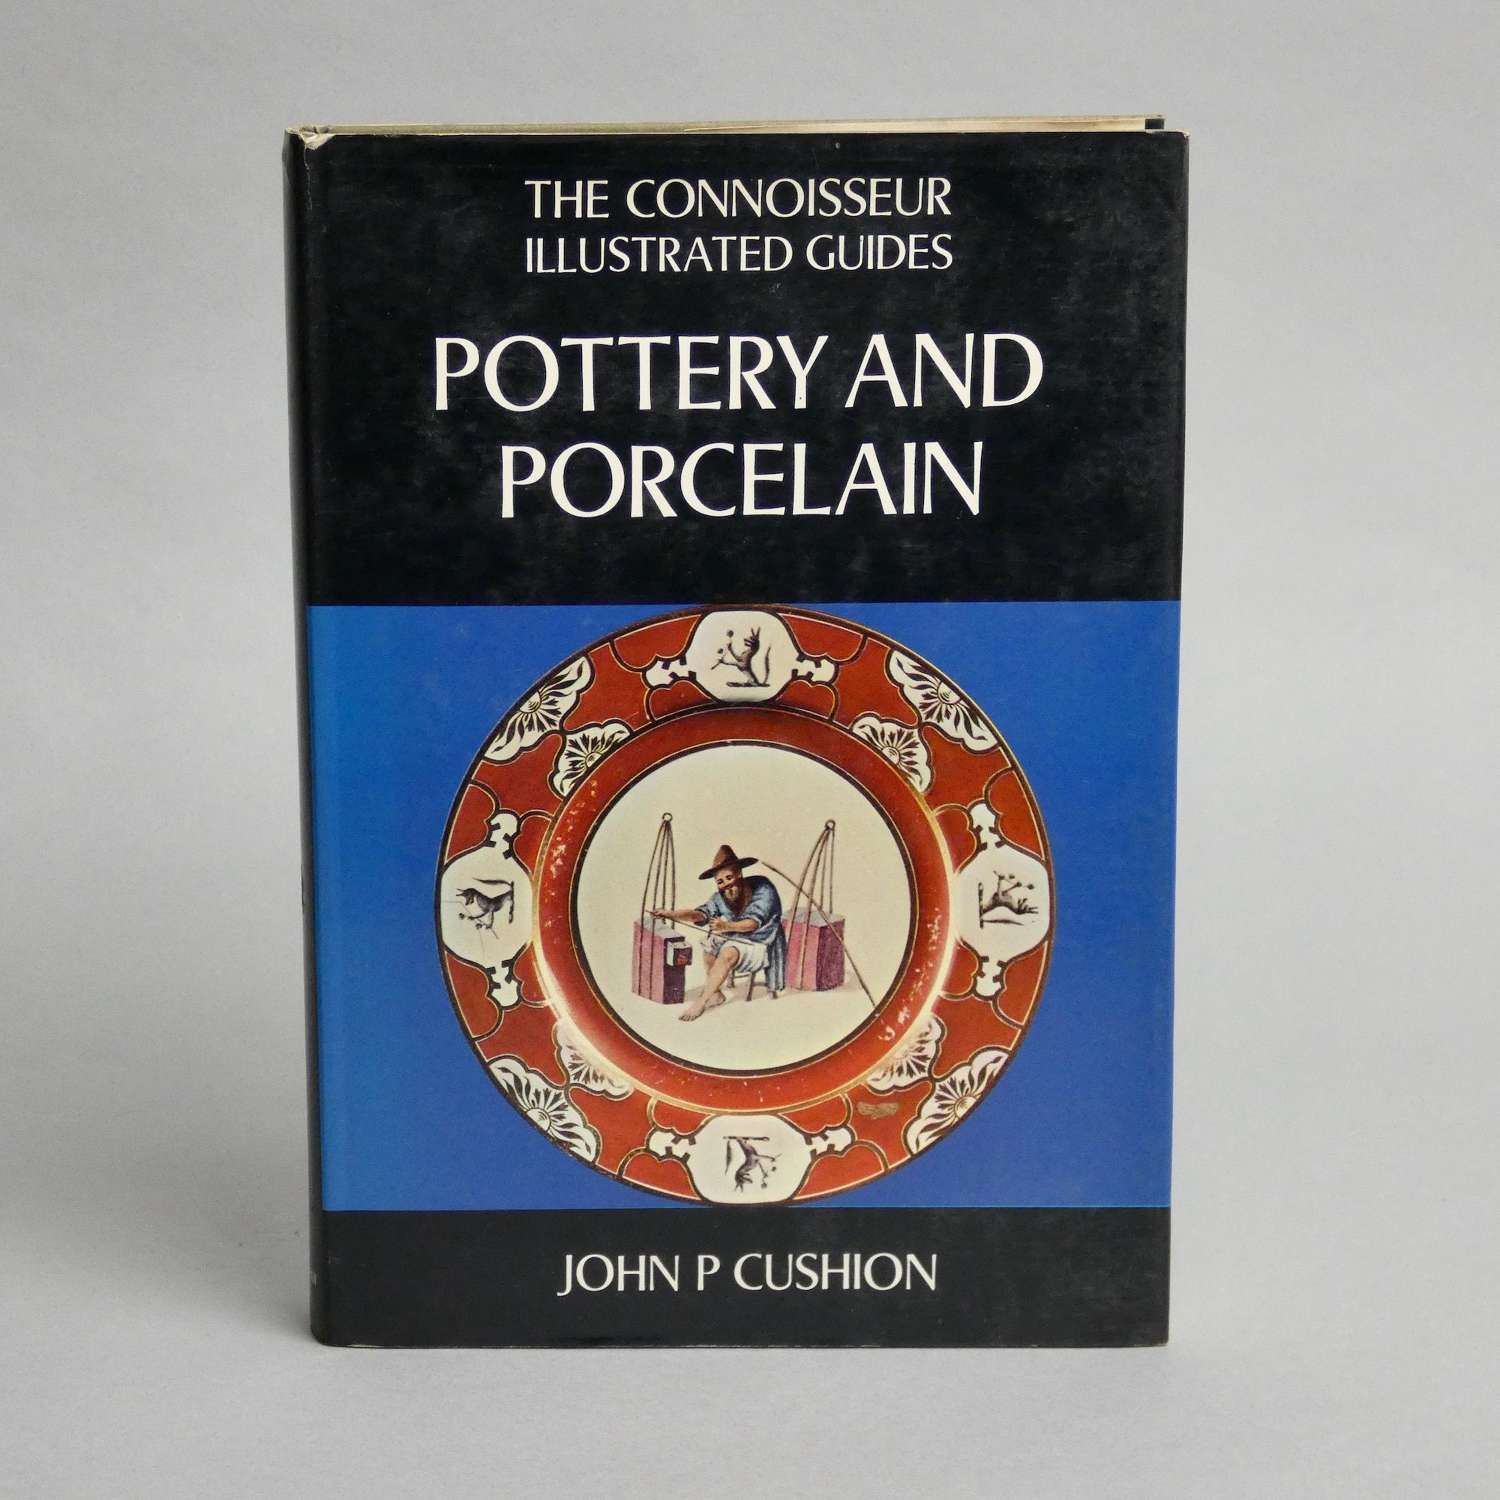 Illustrated guide to Pottery and Porcelain